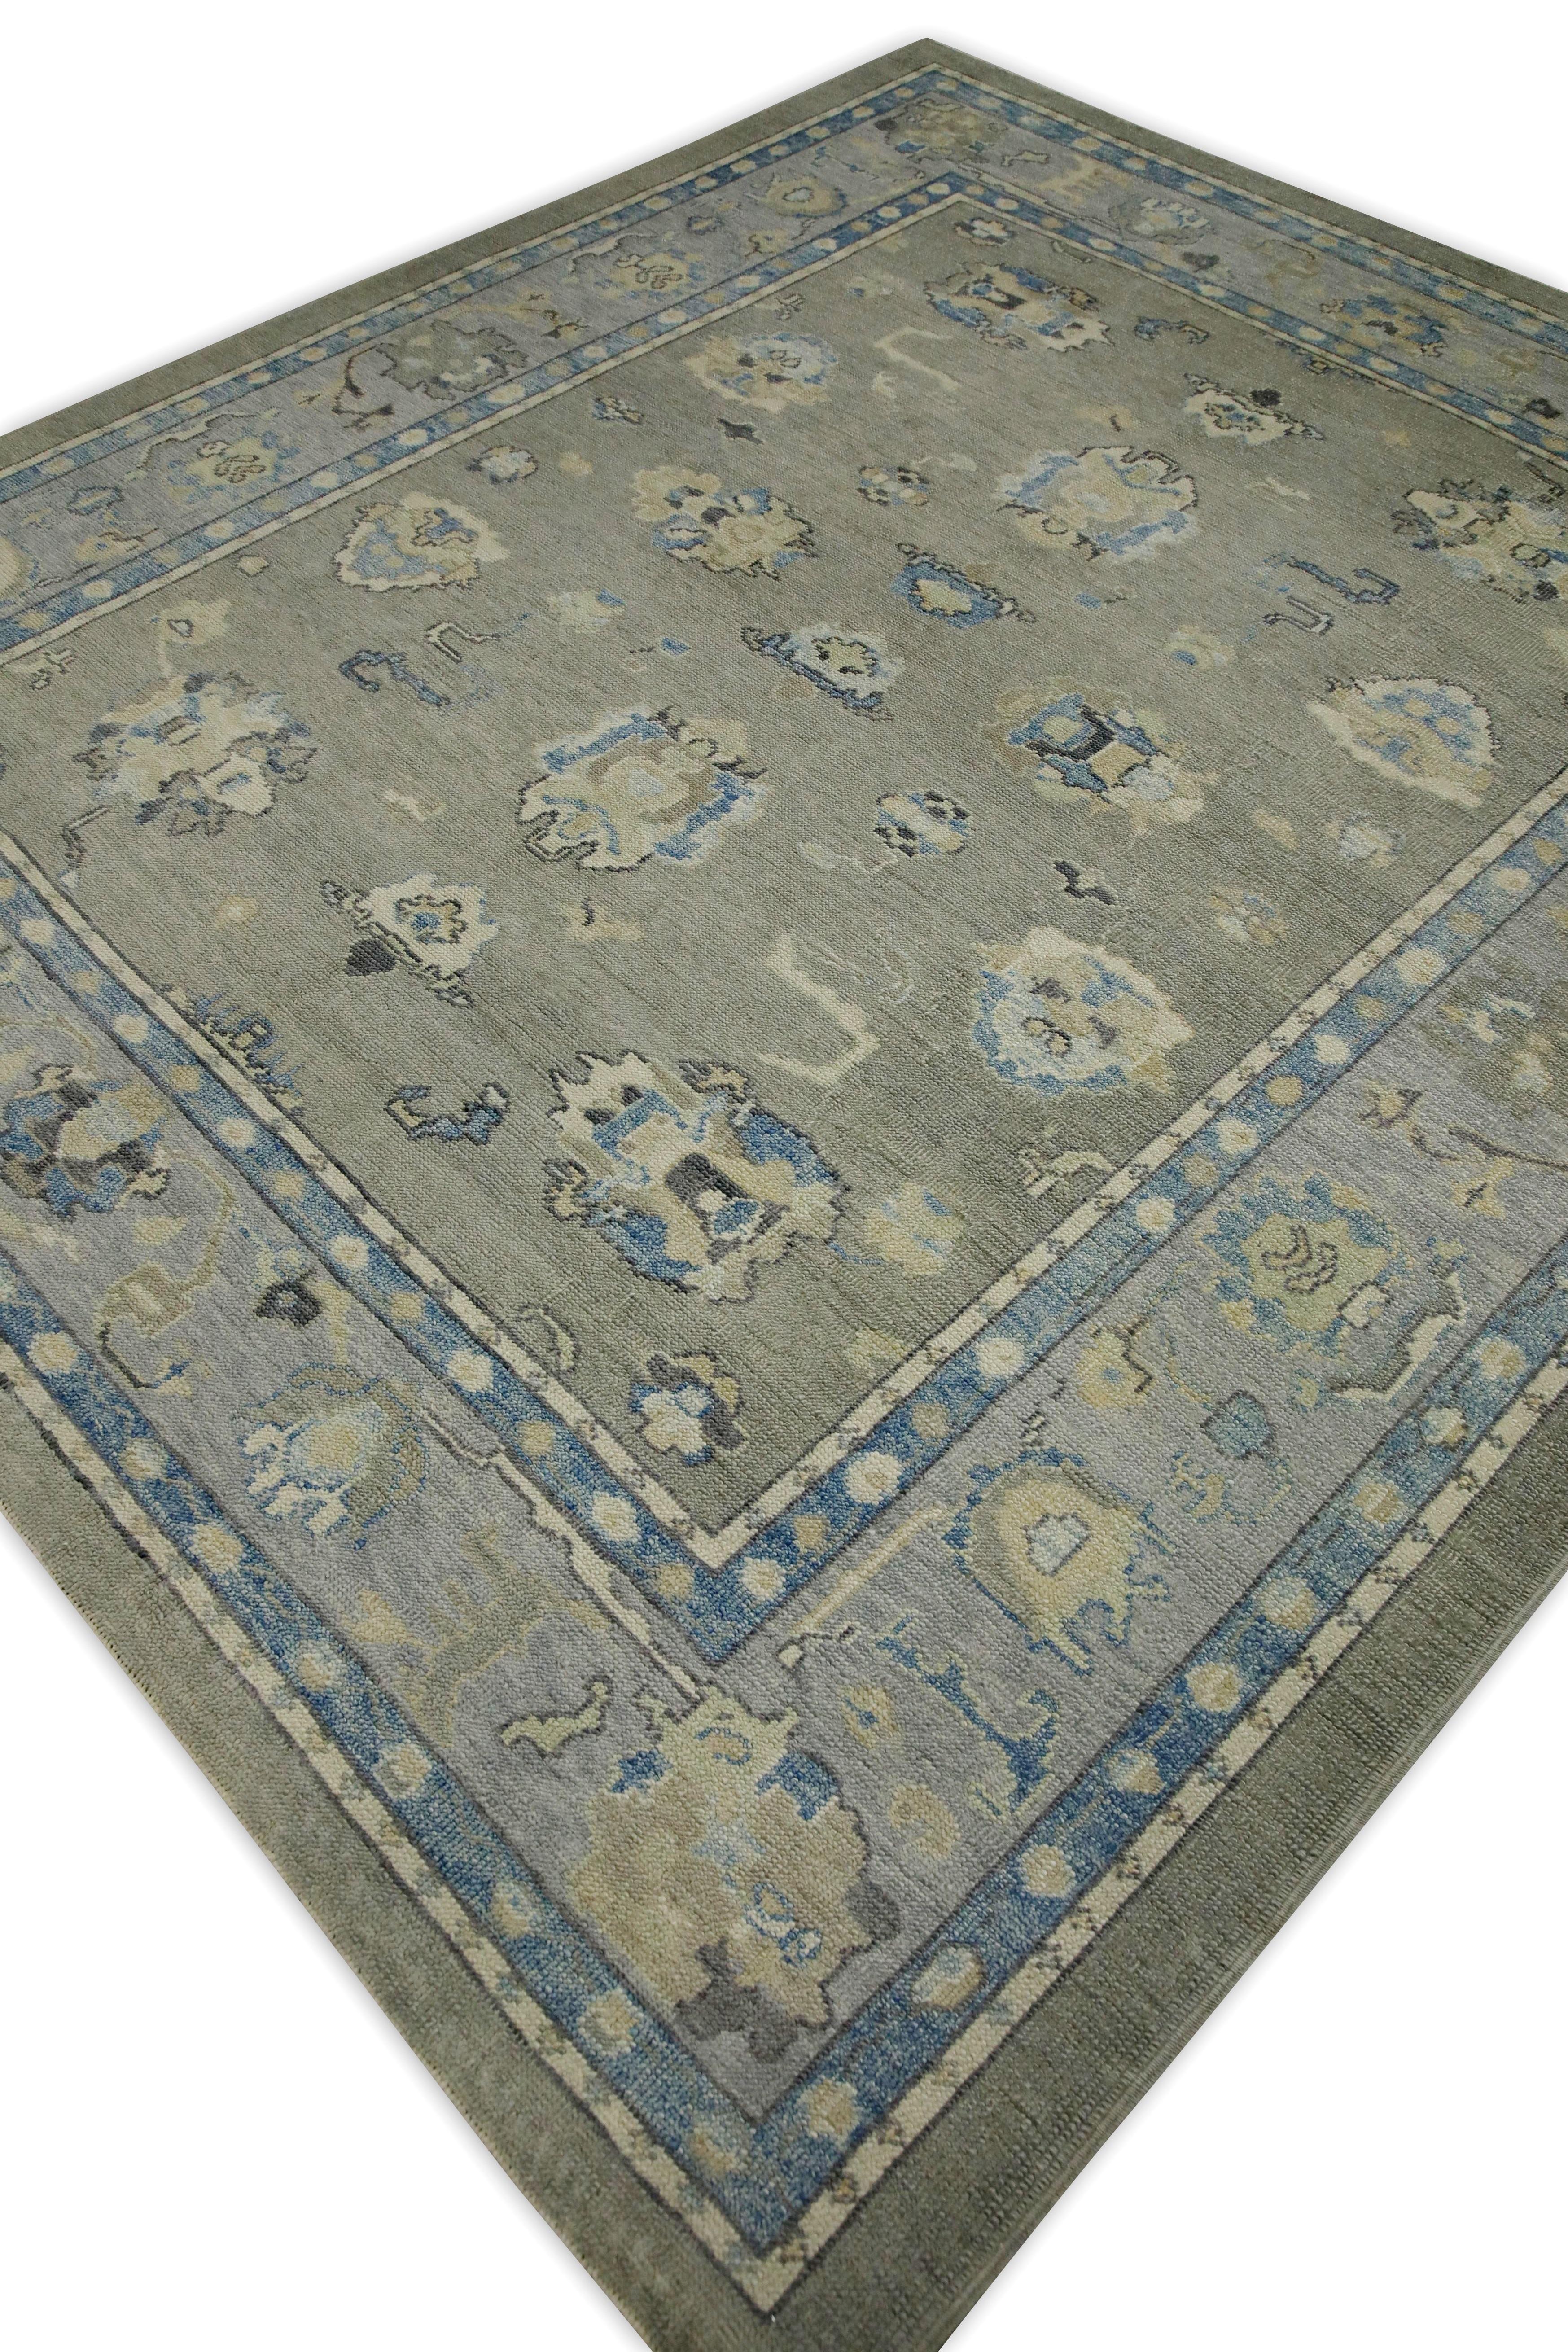 Contemporary Gray & Blue Floral Design Handwoven Wool Turkish Oushak Rug 8'5